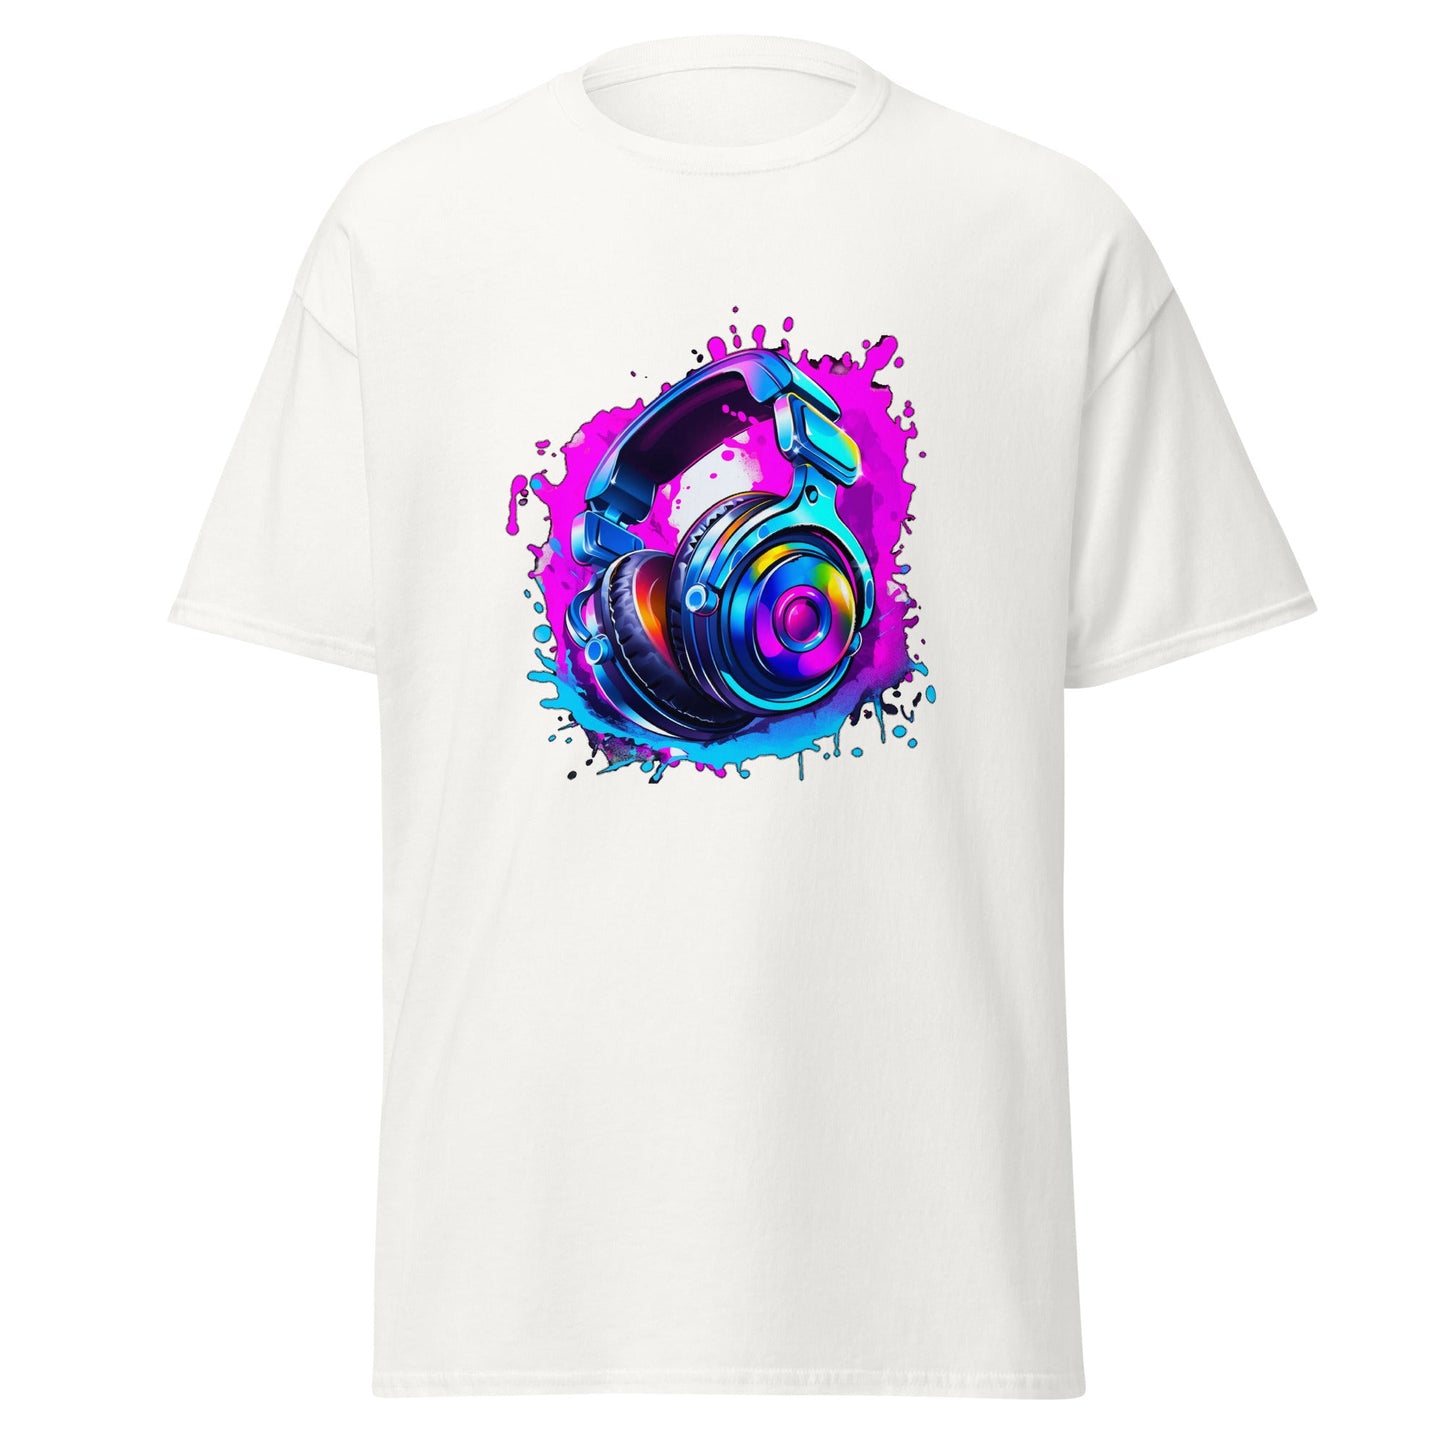 Headphones T - Shirt Clubbing Party Night Out MensT - ShirtGalactrip CoutureHeadphones T - Shirt Clubbing Party Night Out Mens